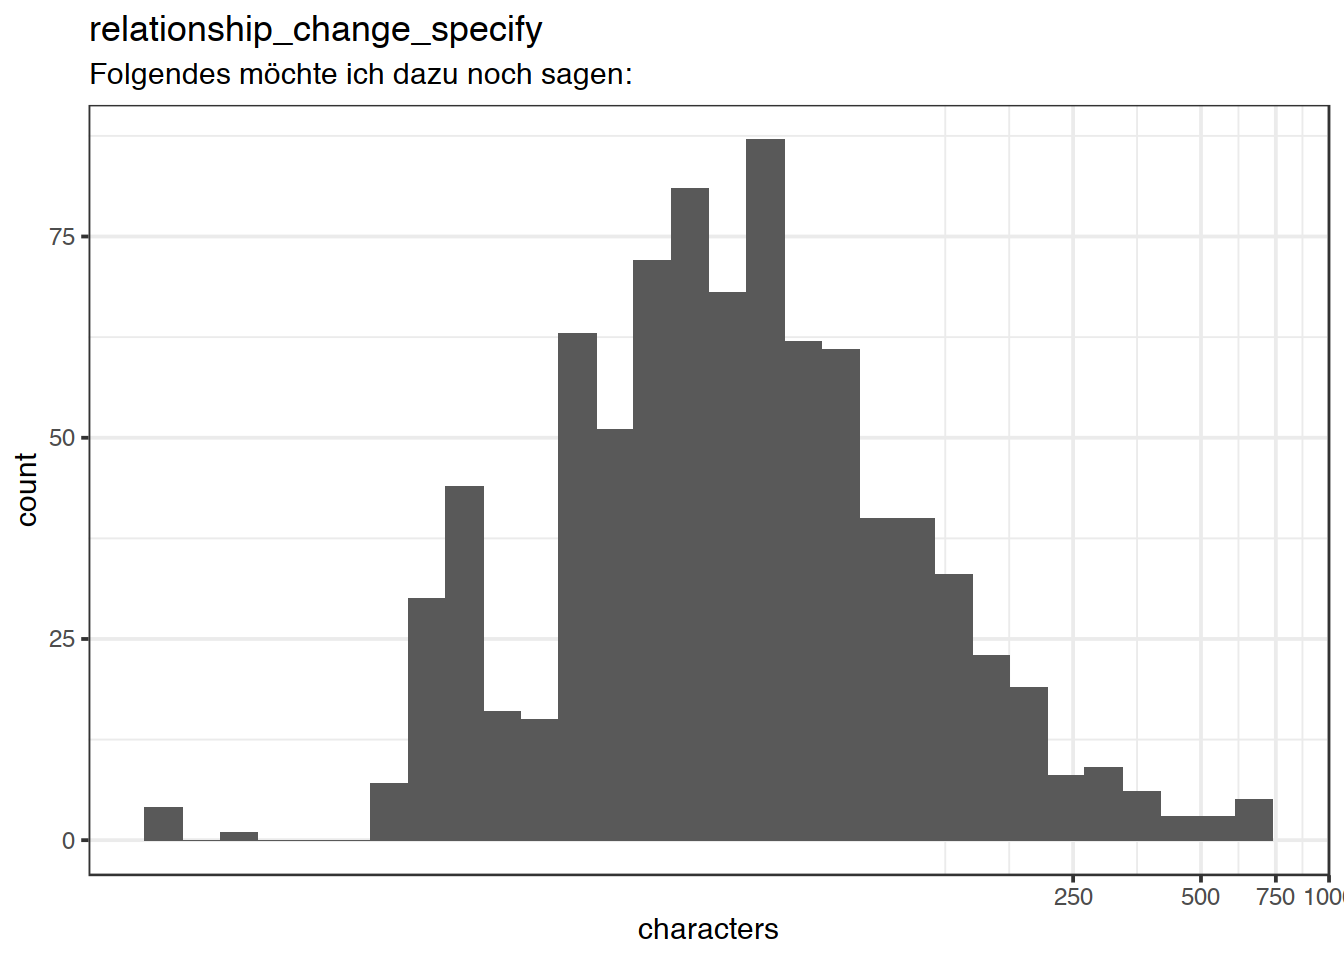 Distribution of values for relationship_change_specify